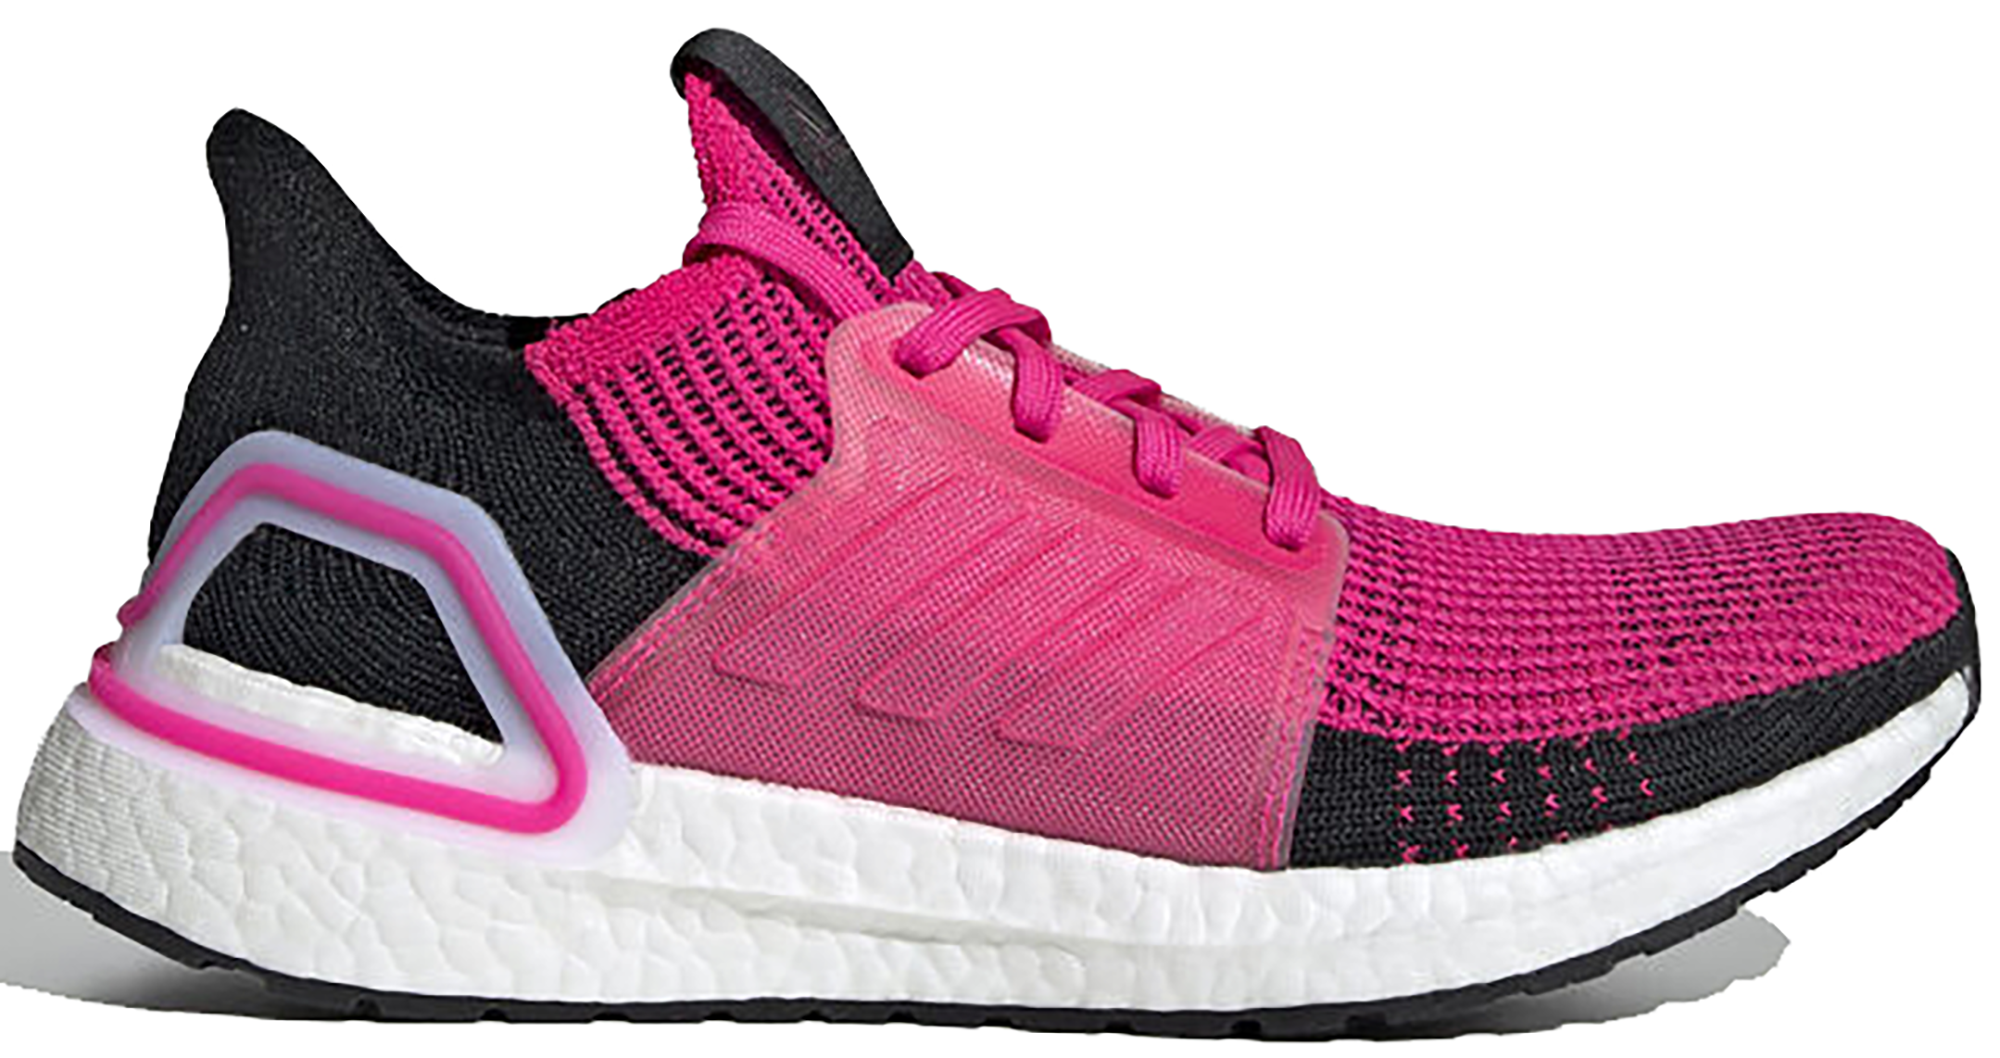 adidas boost pink and black